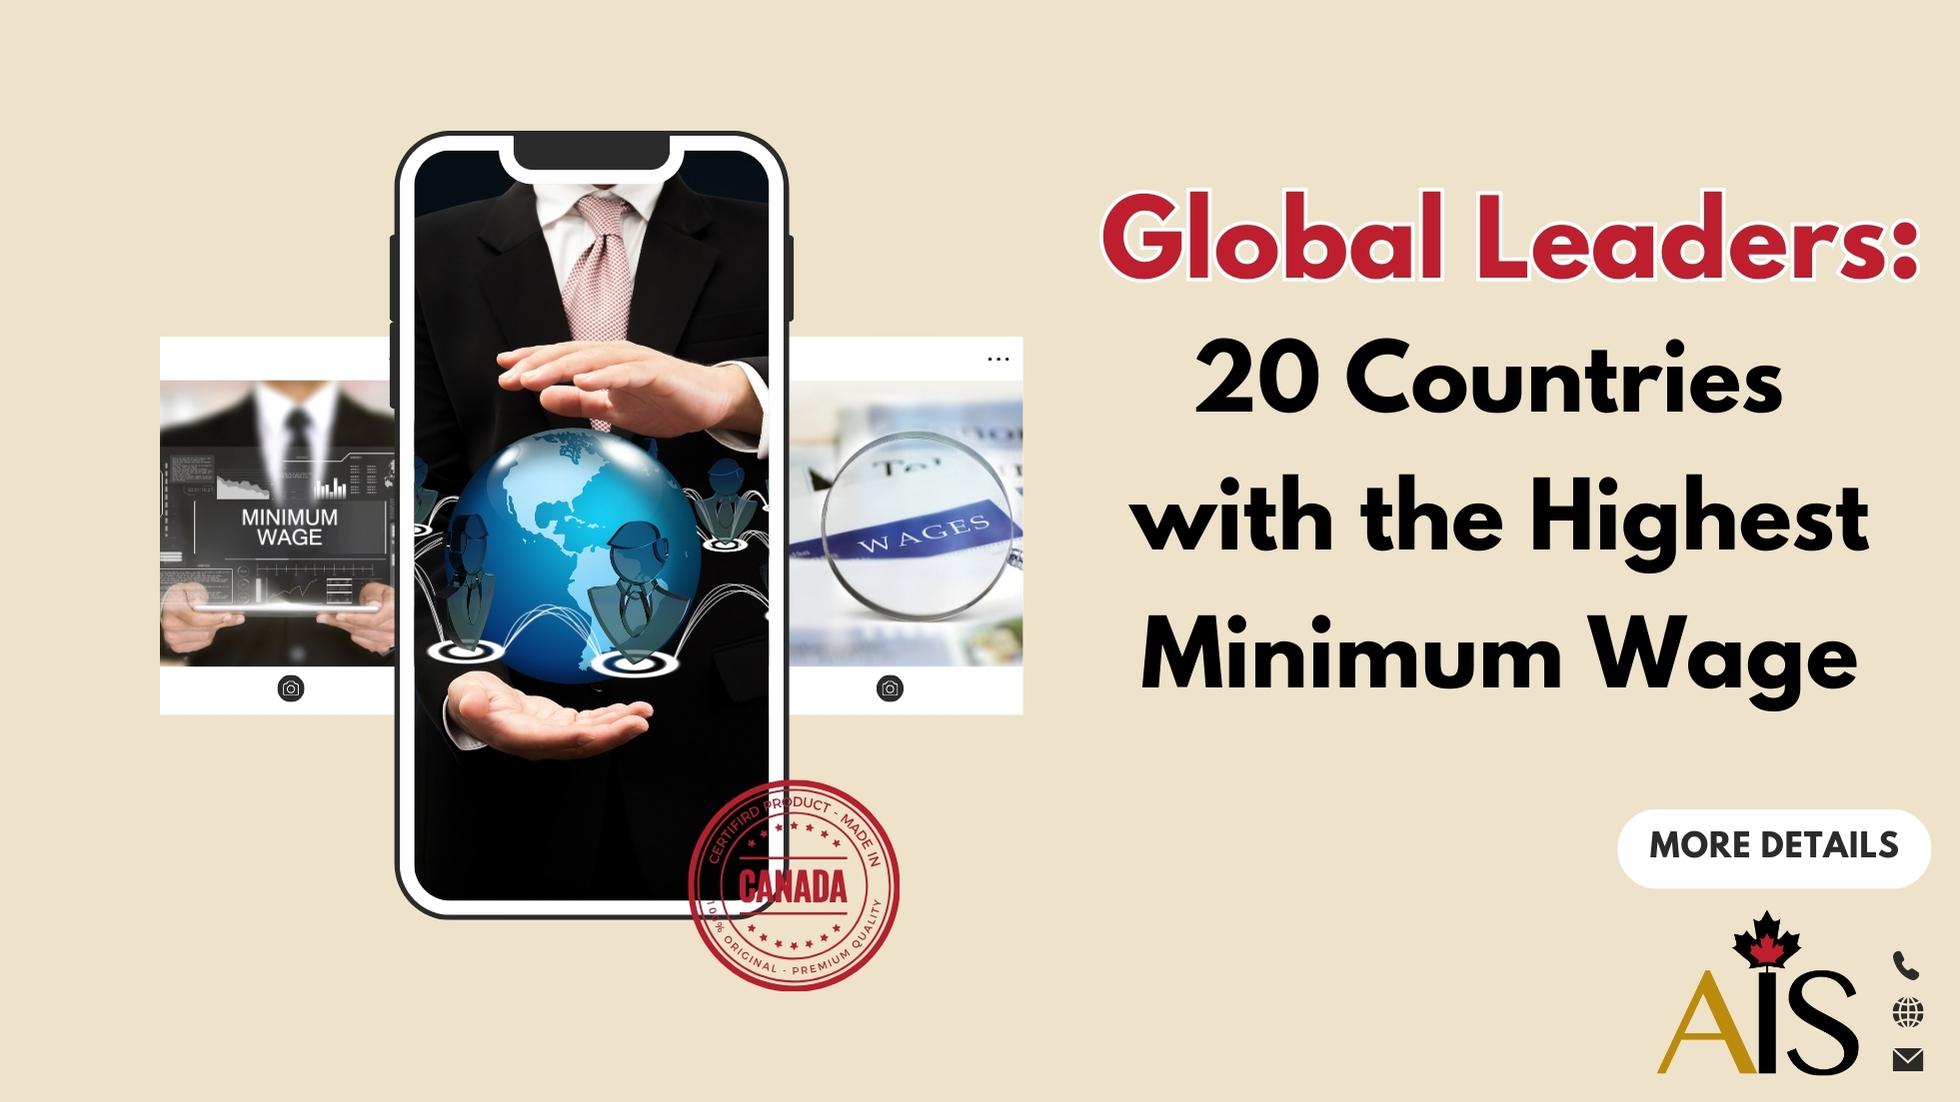 Global Leaders: 20 Countries with the Highest Minimum Wage